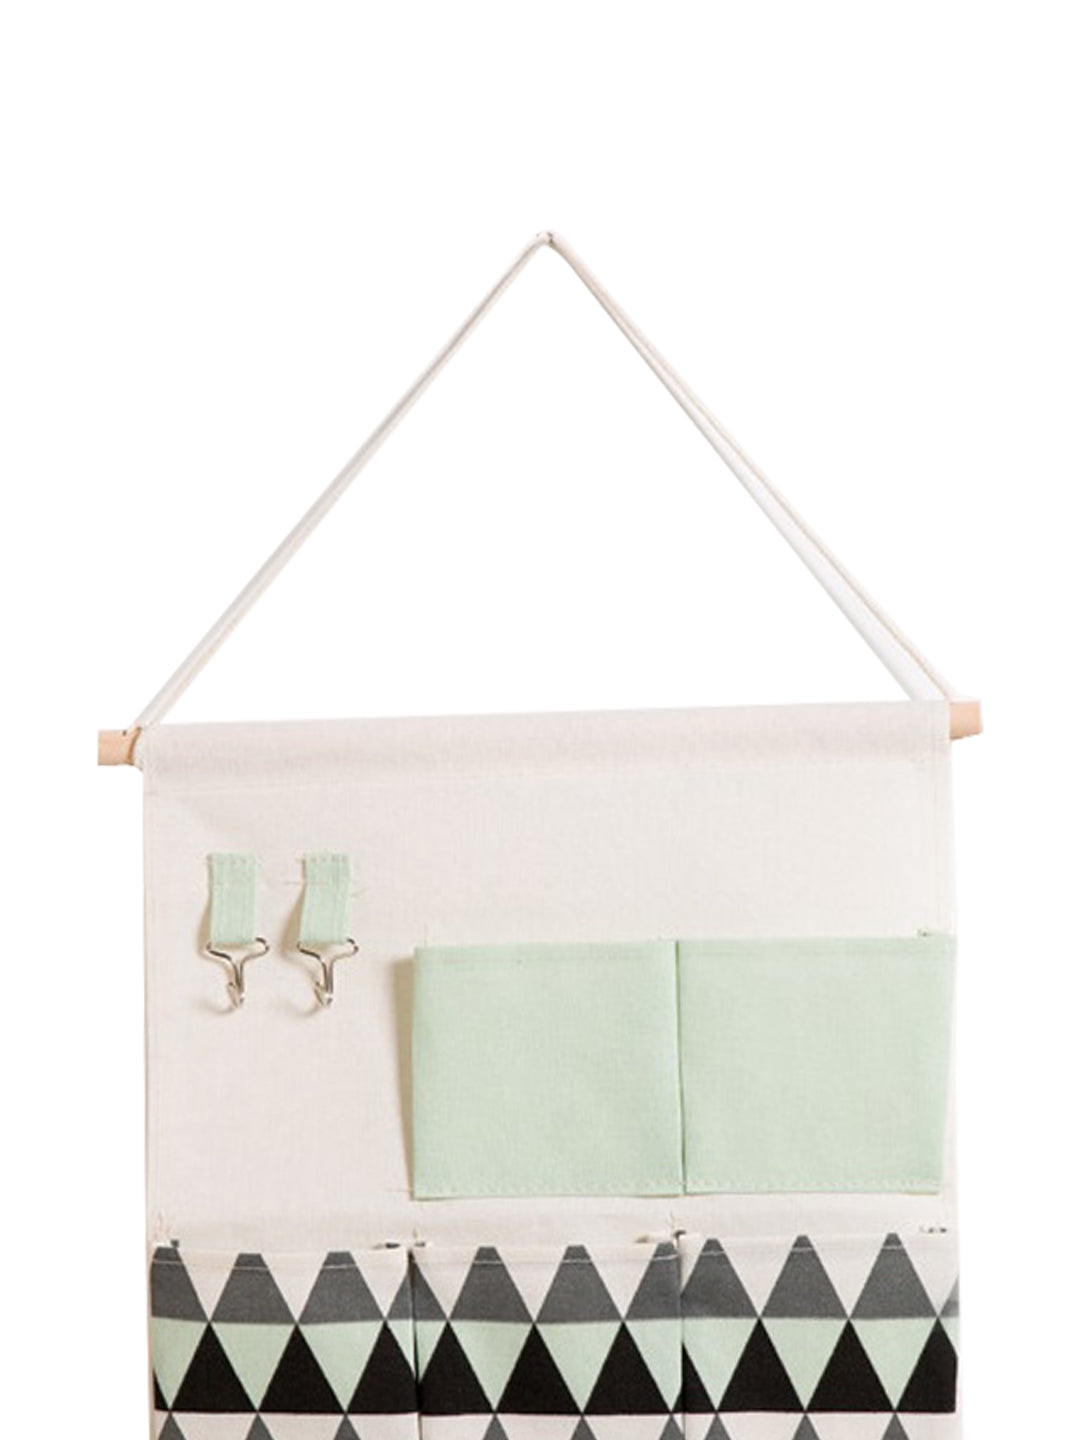 VON CASA Wall Hanging Storage Bag With 7 Pockets And Key Hook - Green